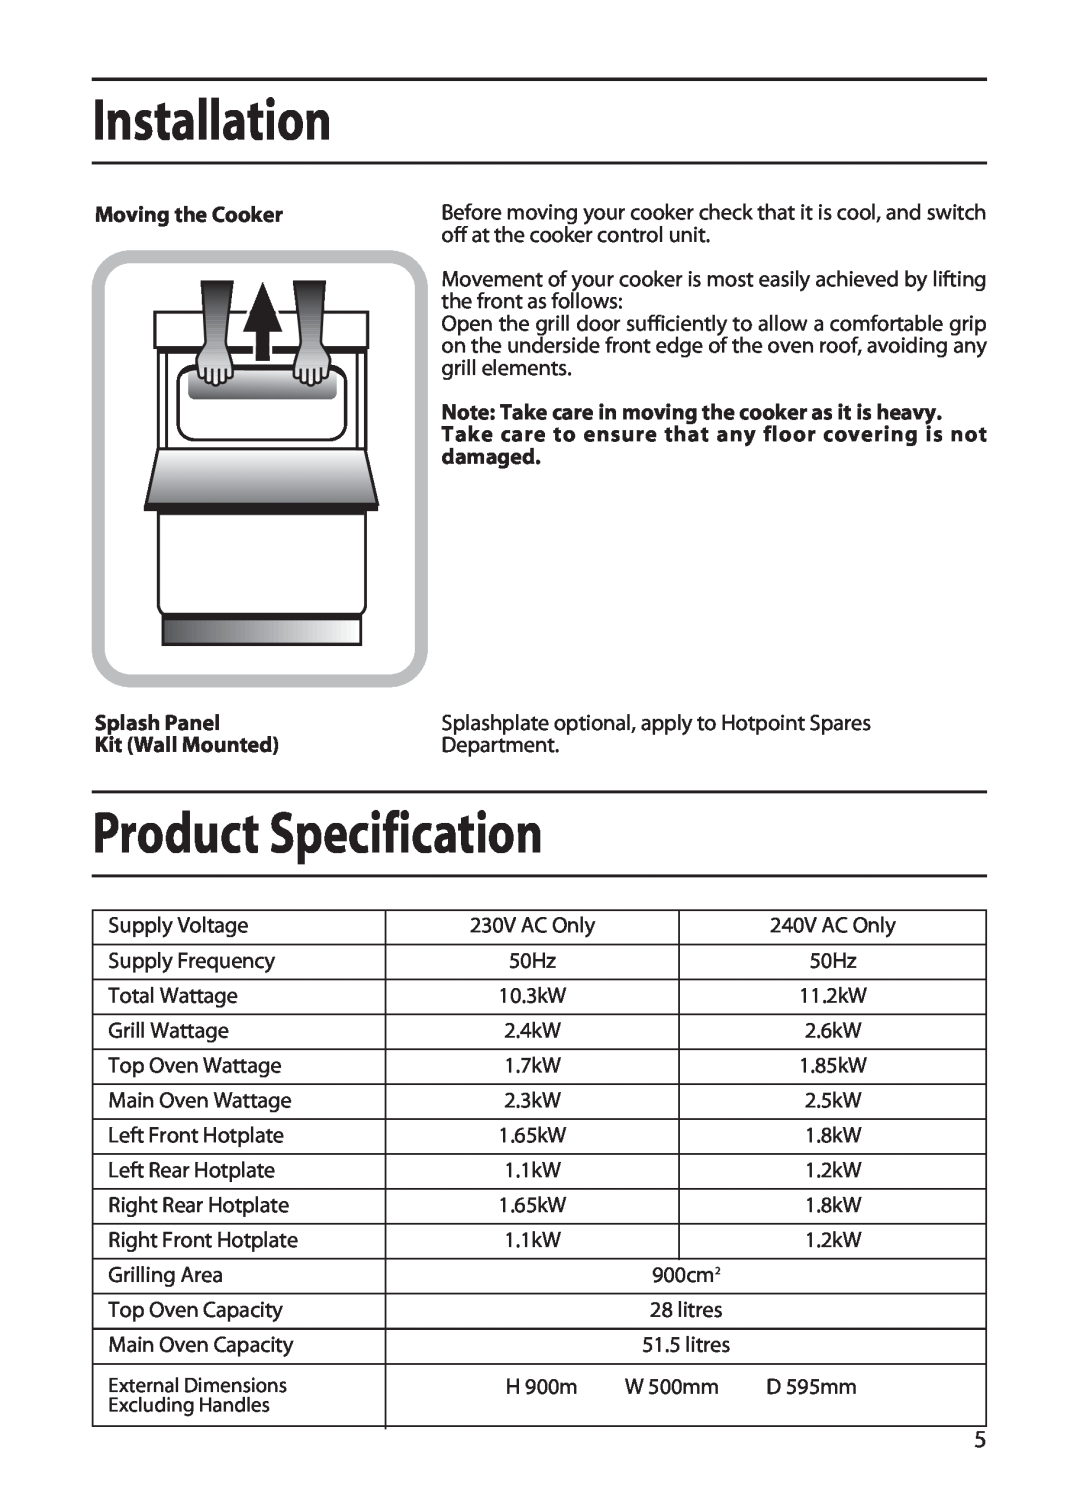 Hotpoint EW51 manual Product Specification, Installation, Moving the Cooker Splash Panel Kit Wall Mounted 